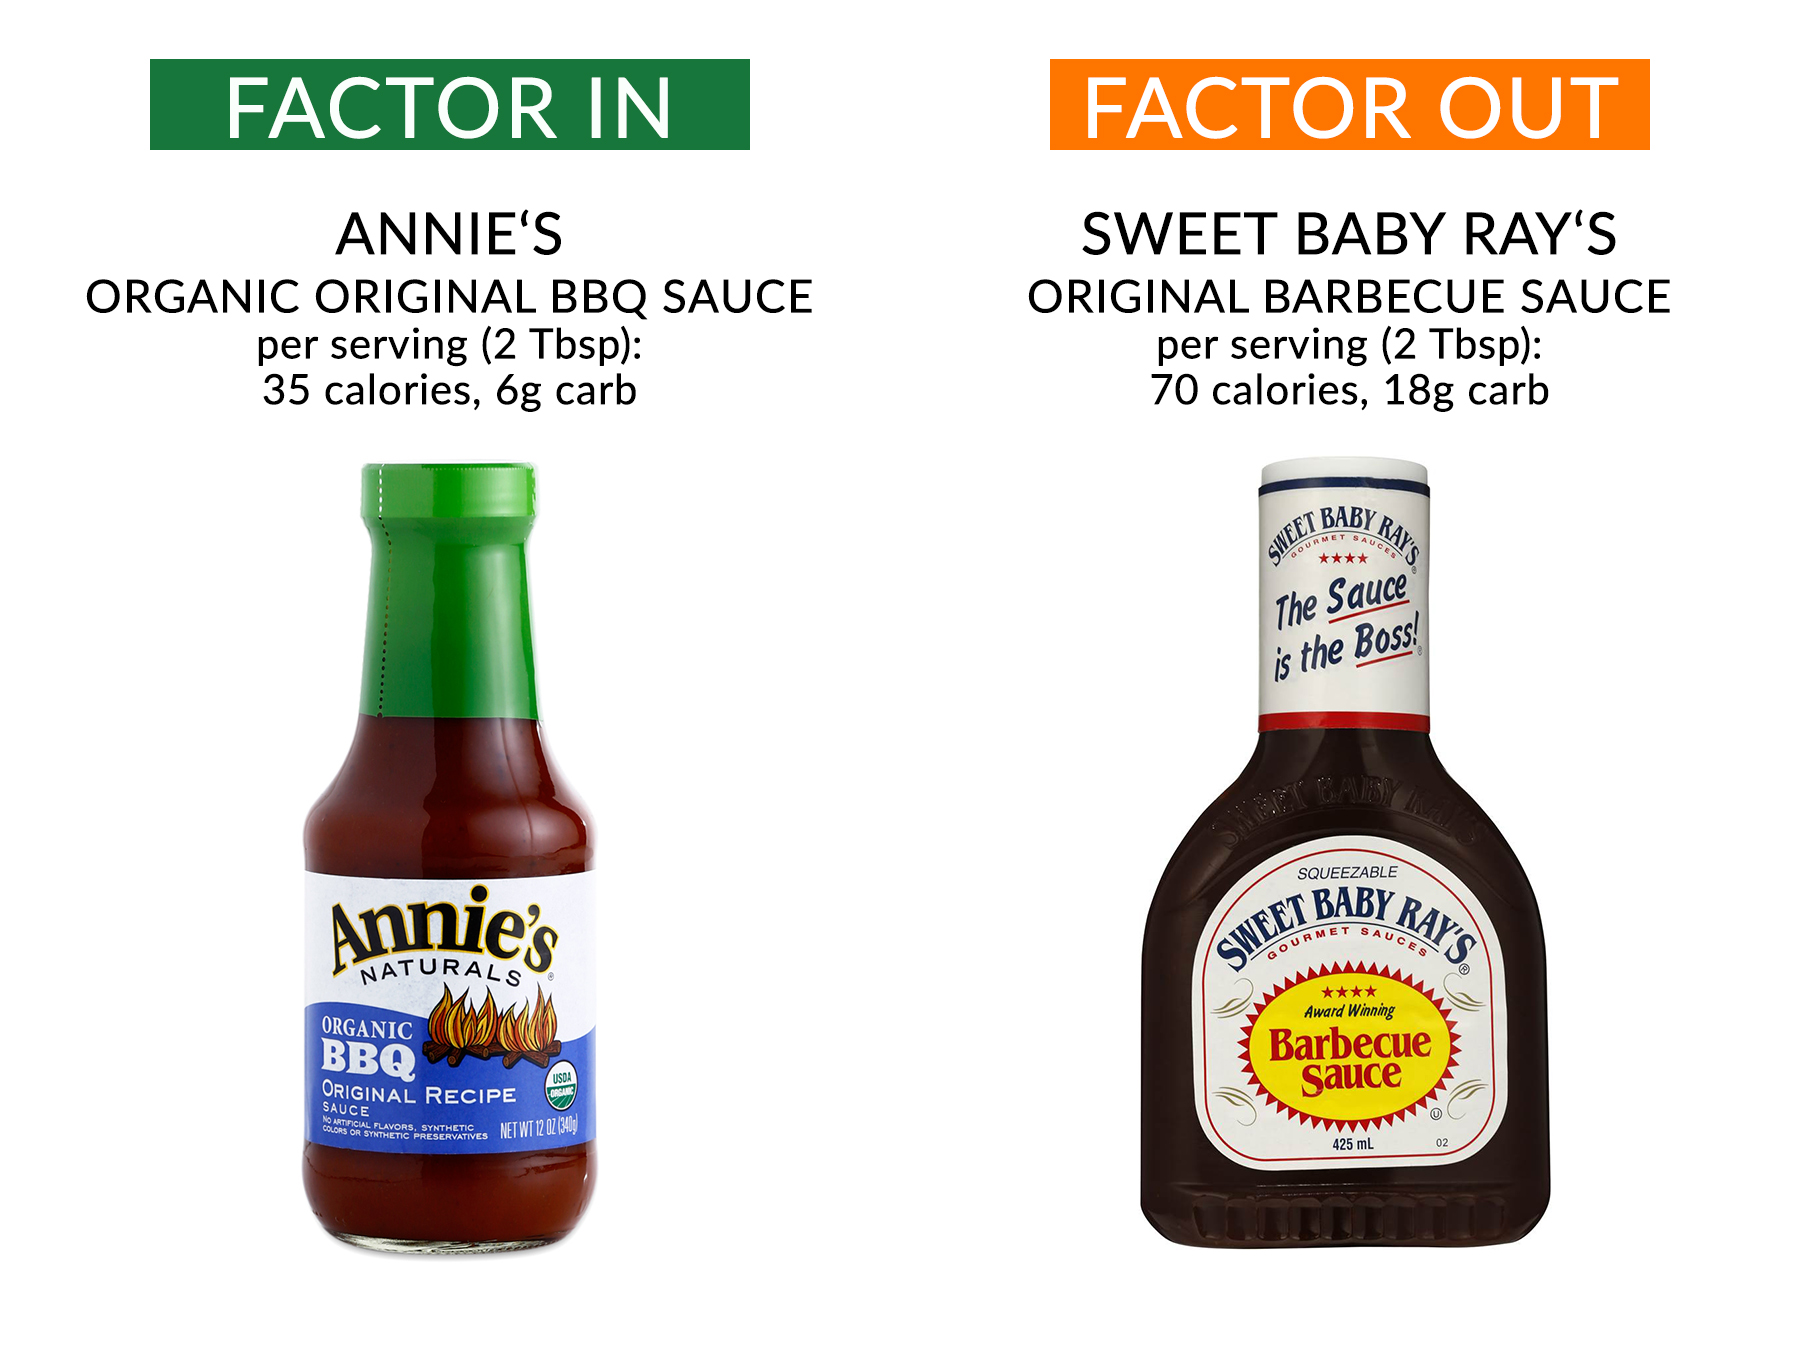 annie's barbecue sauce vs sweet baby ray's f-factor